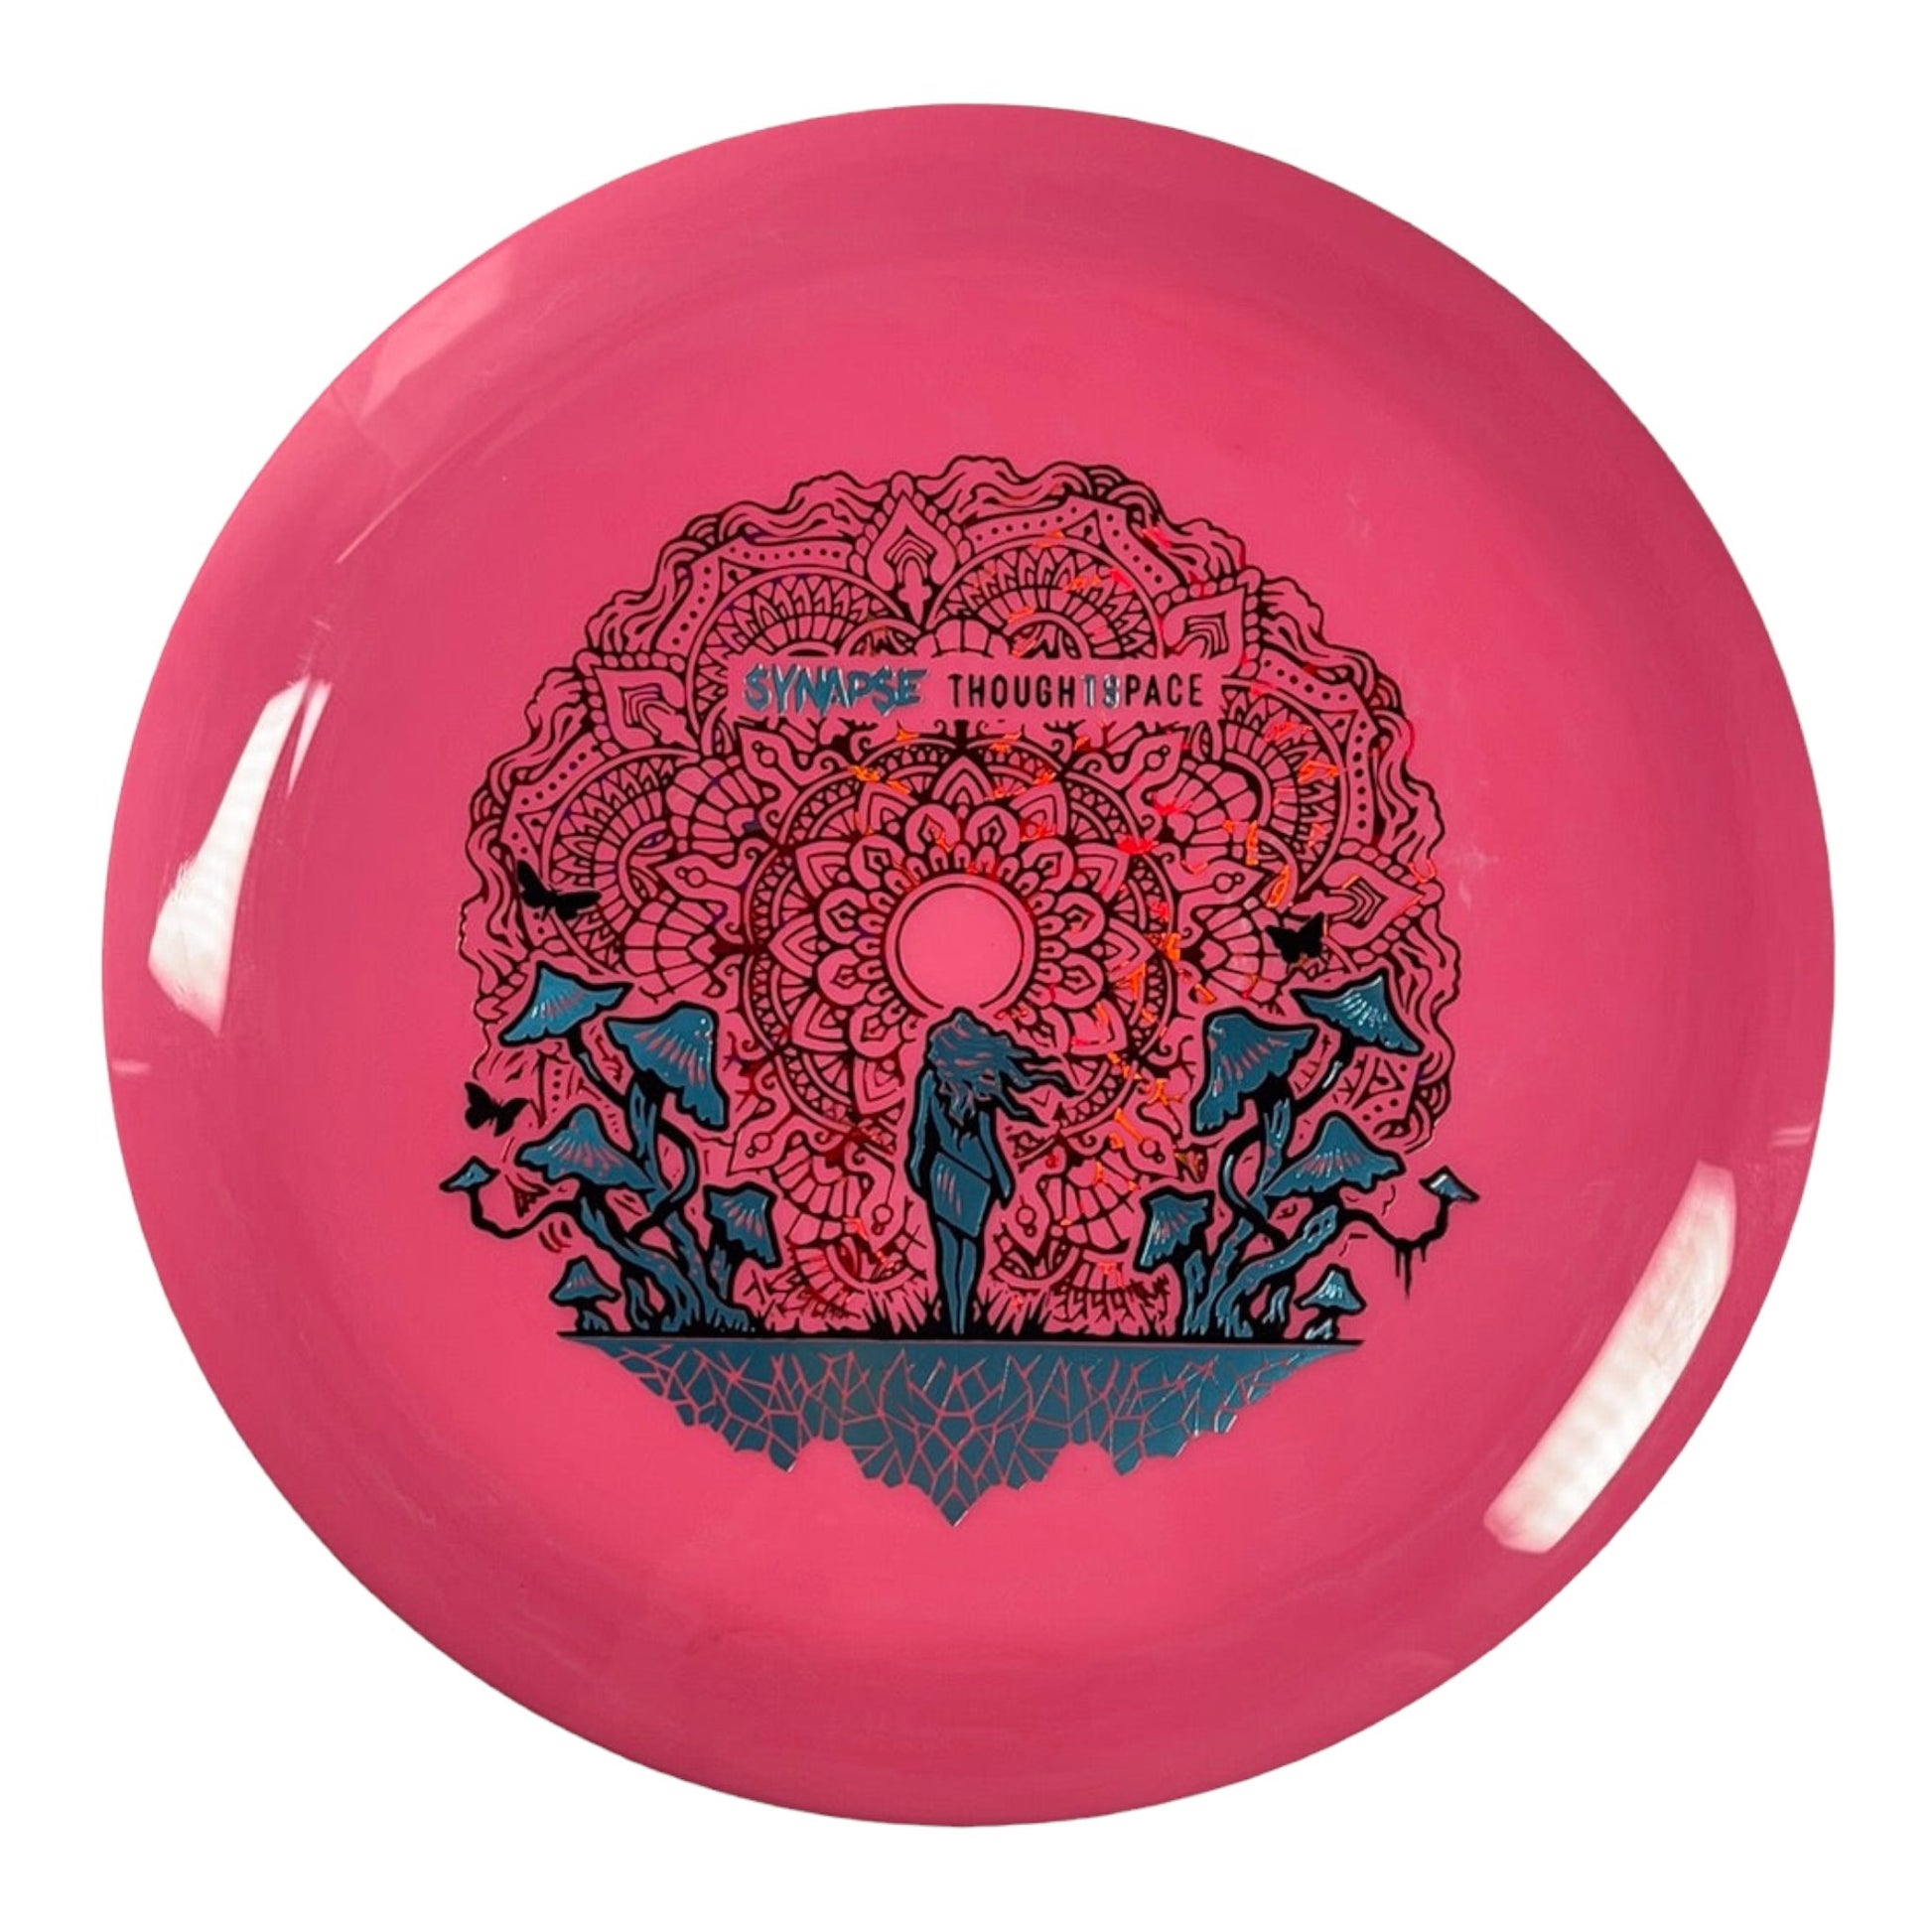 Thought Space Athletics Synapse | Aura | Pink/Red 175g Disc Golf